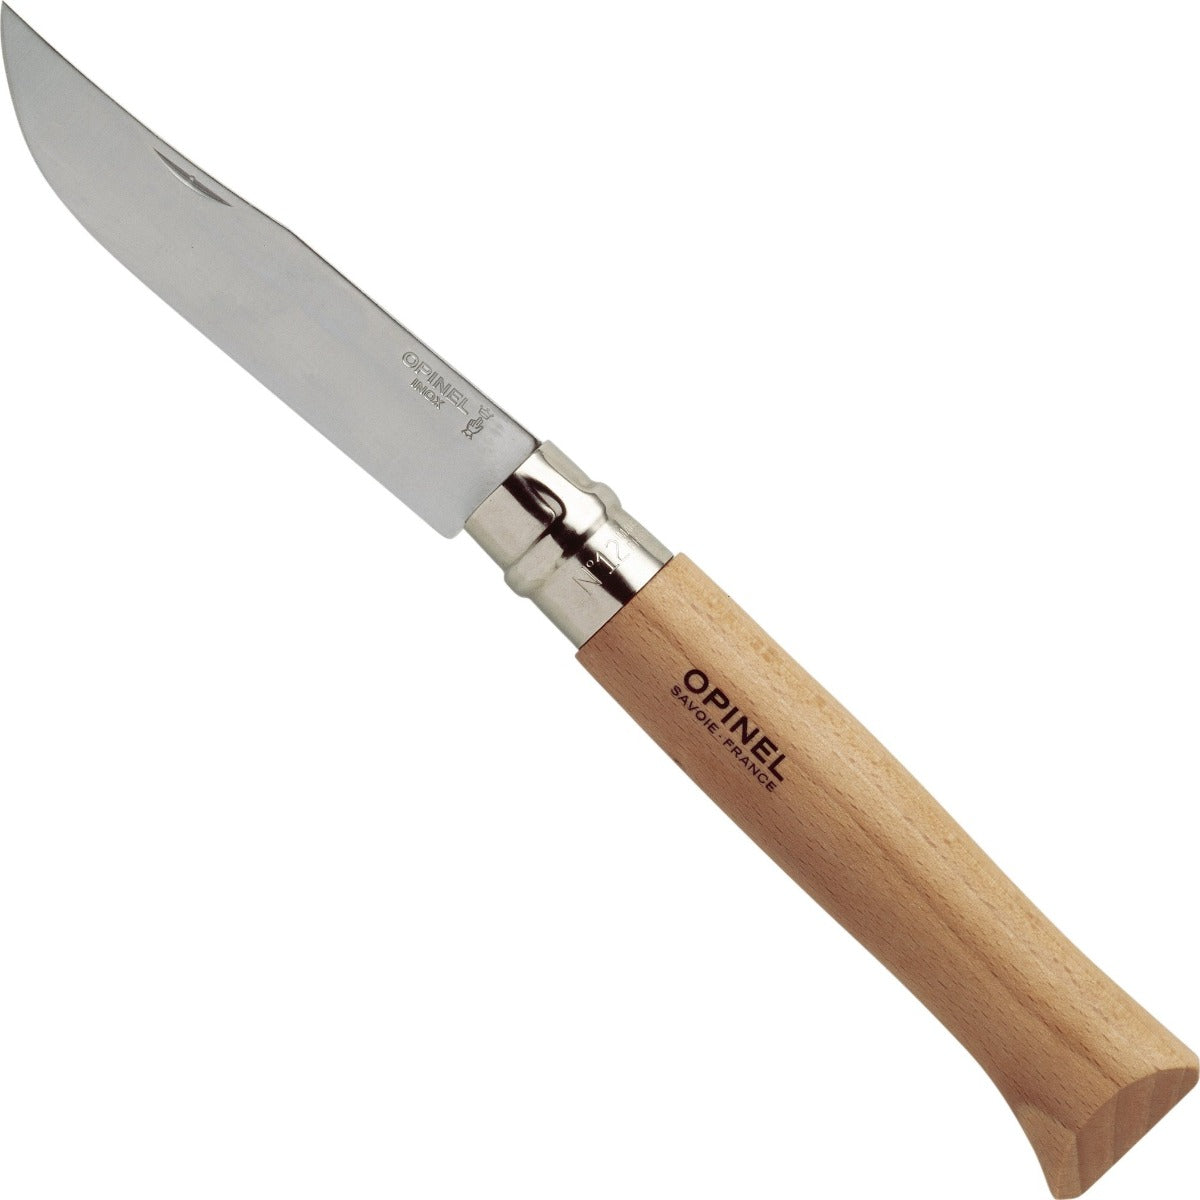 Opinel No. 12 Explore Bushcraft & Hunting Knife - Awesome Tools